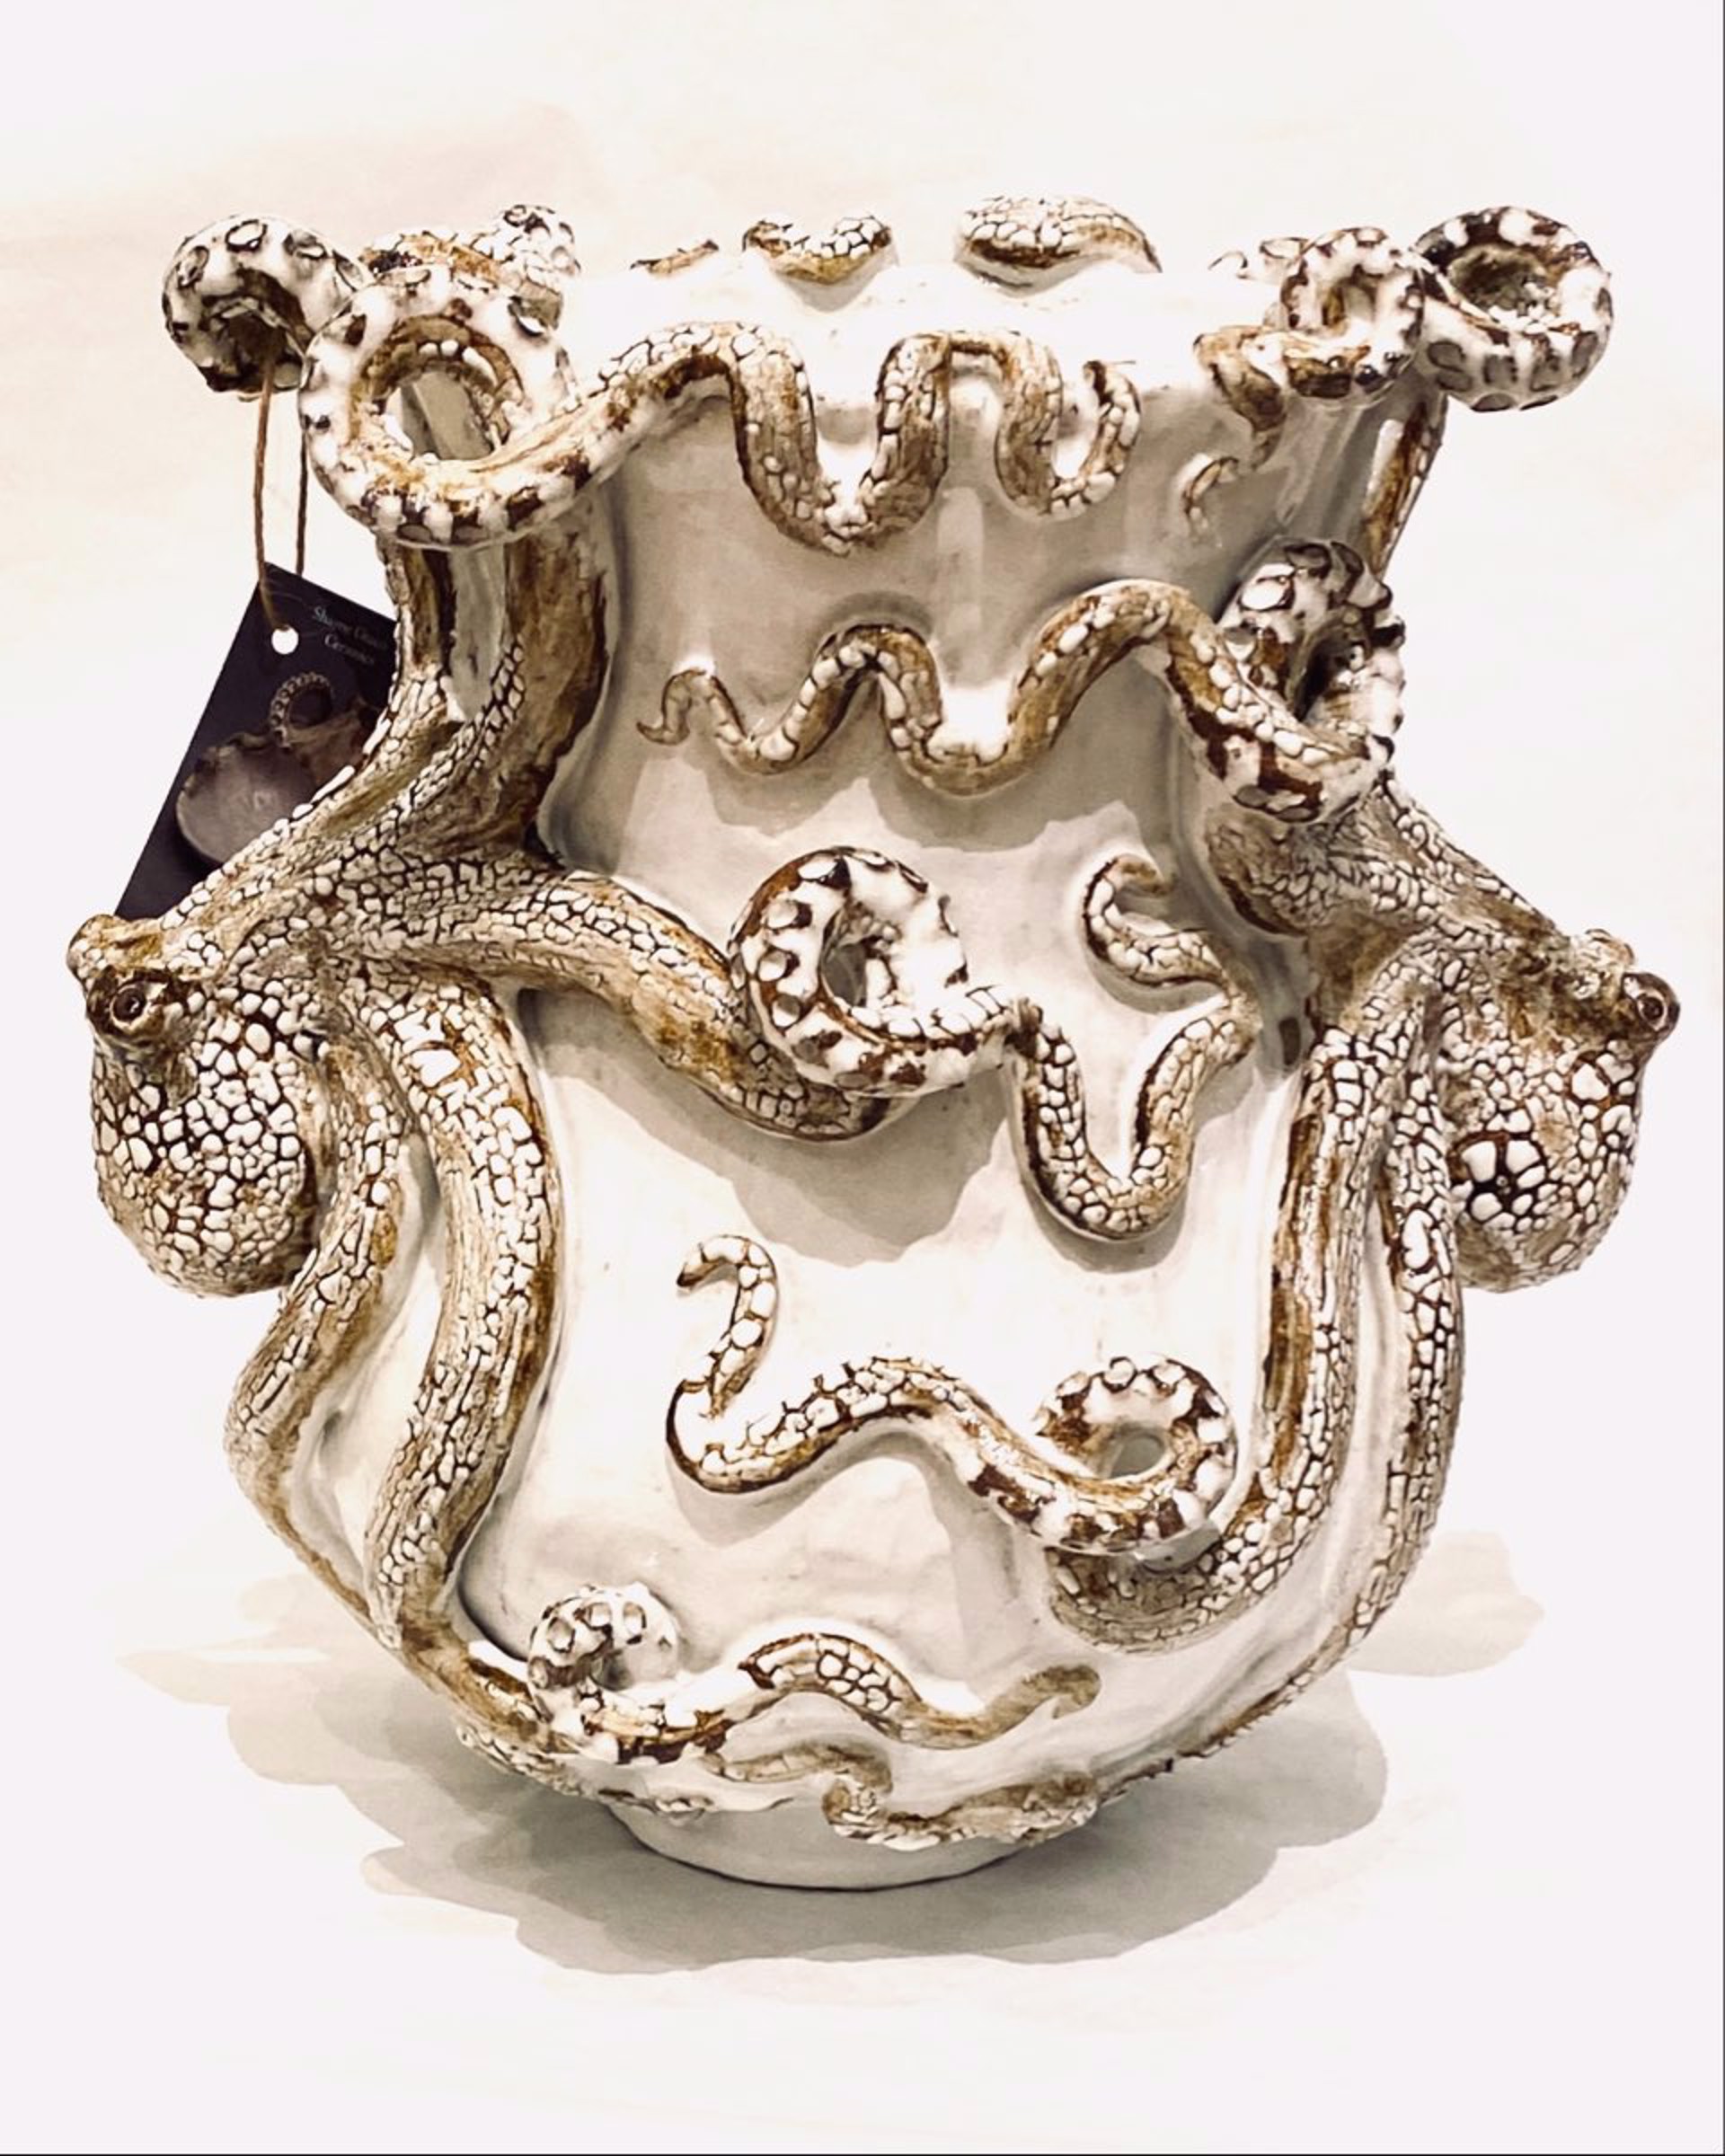 Double Octopus Vase by Shayne Greco